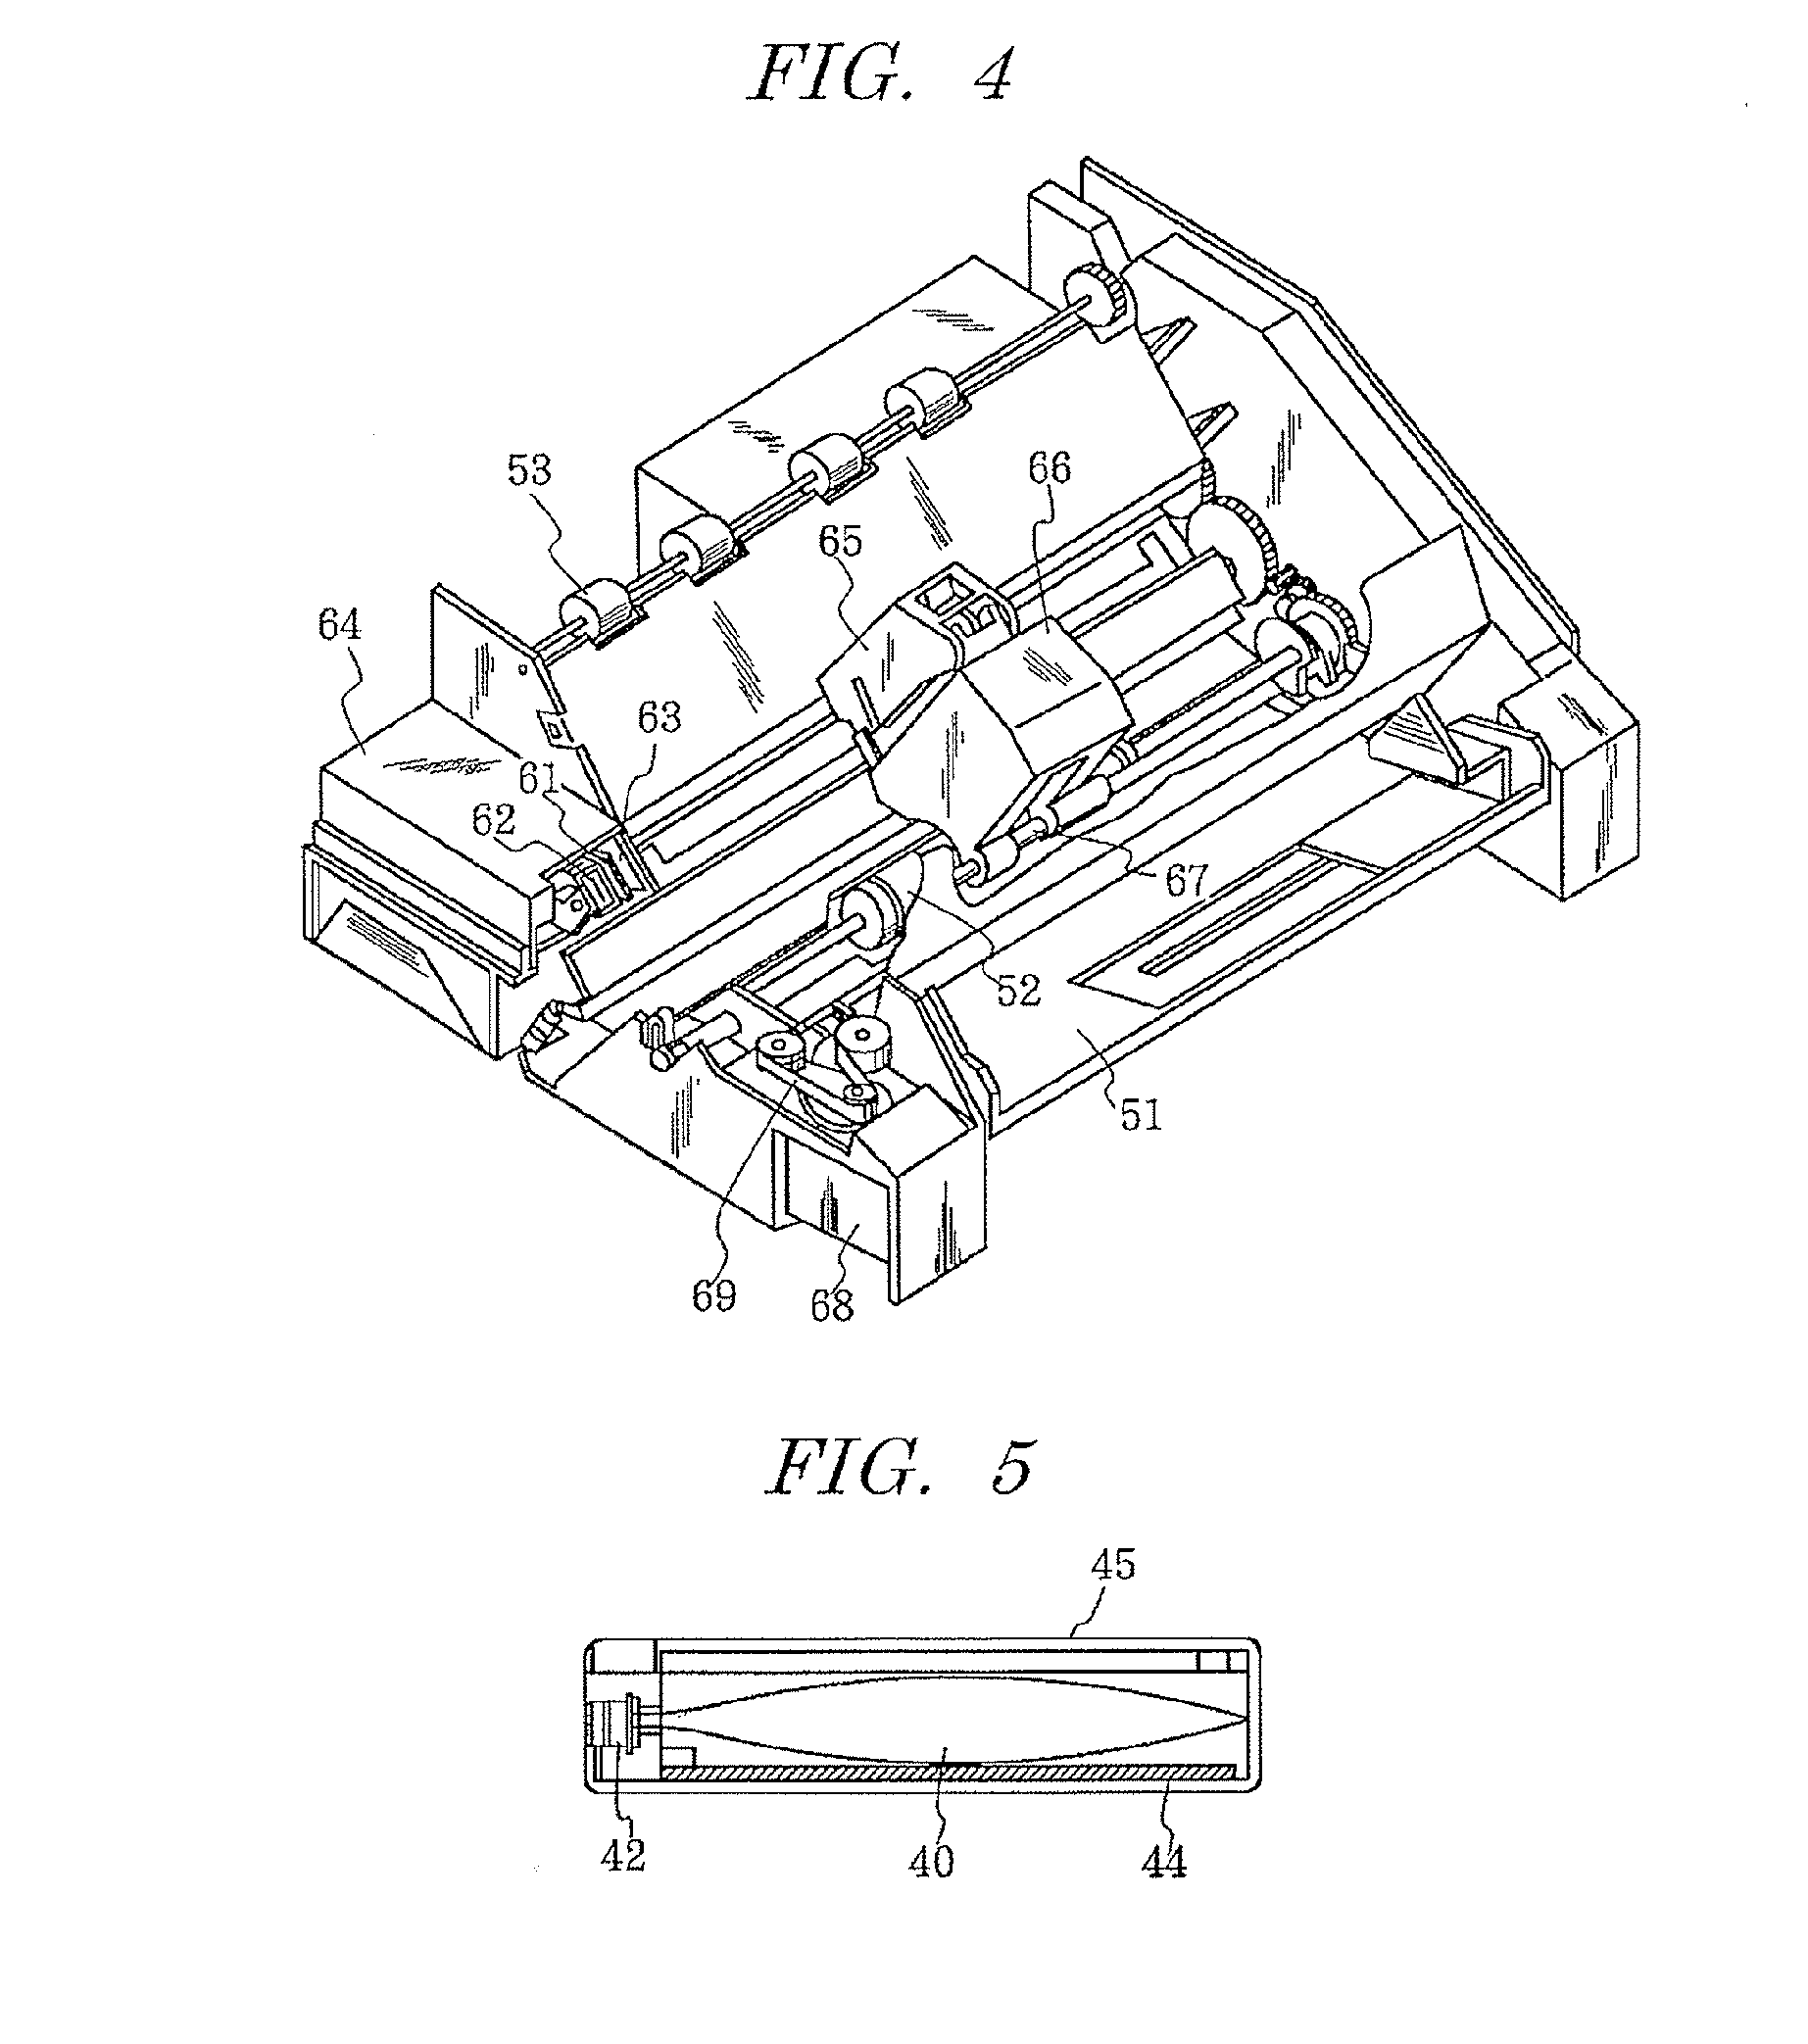 Water-based ink, ink jet recording method, ink cartridge, recording unit, ink jet recording apparatus, and image forming method